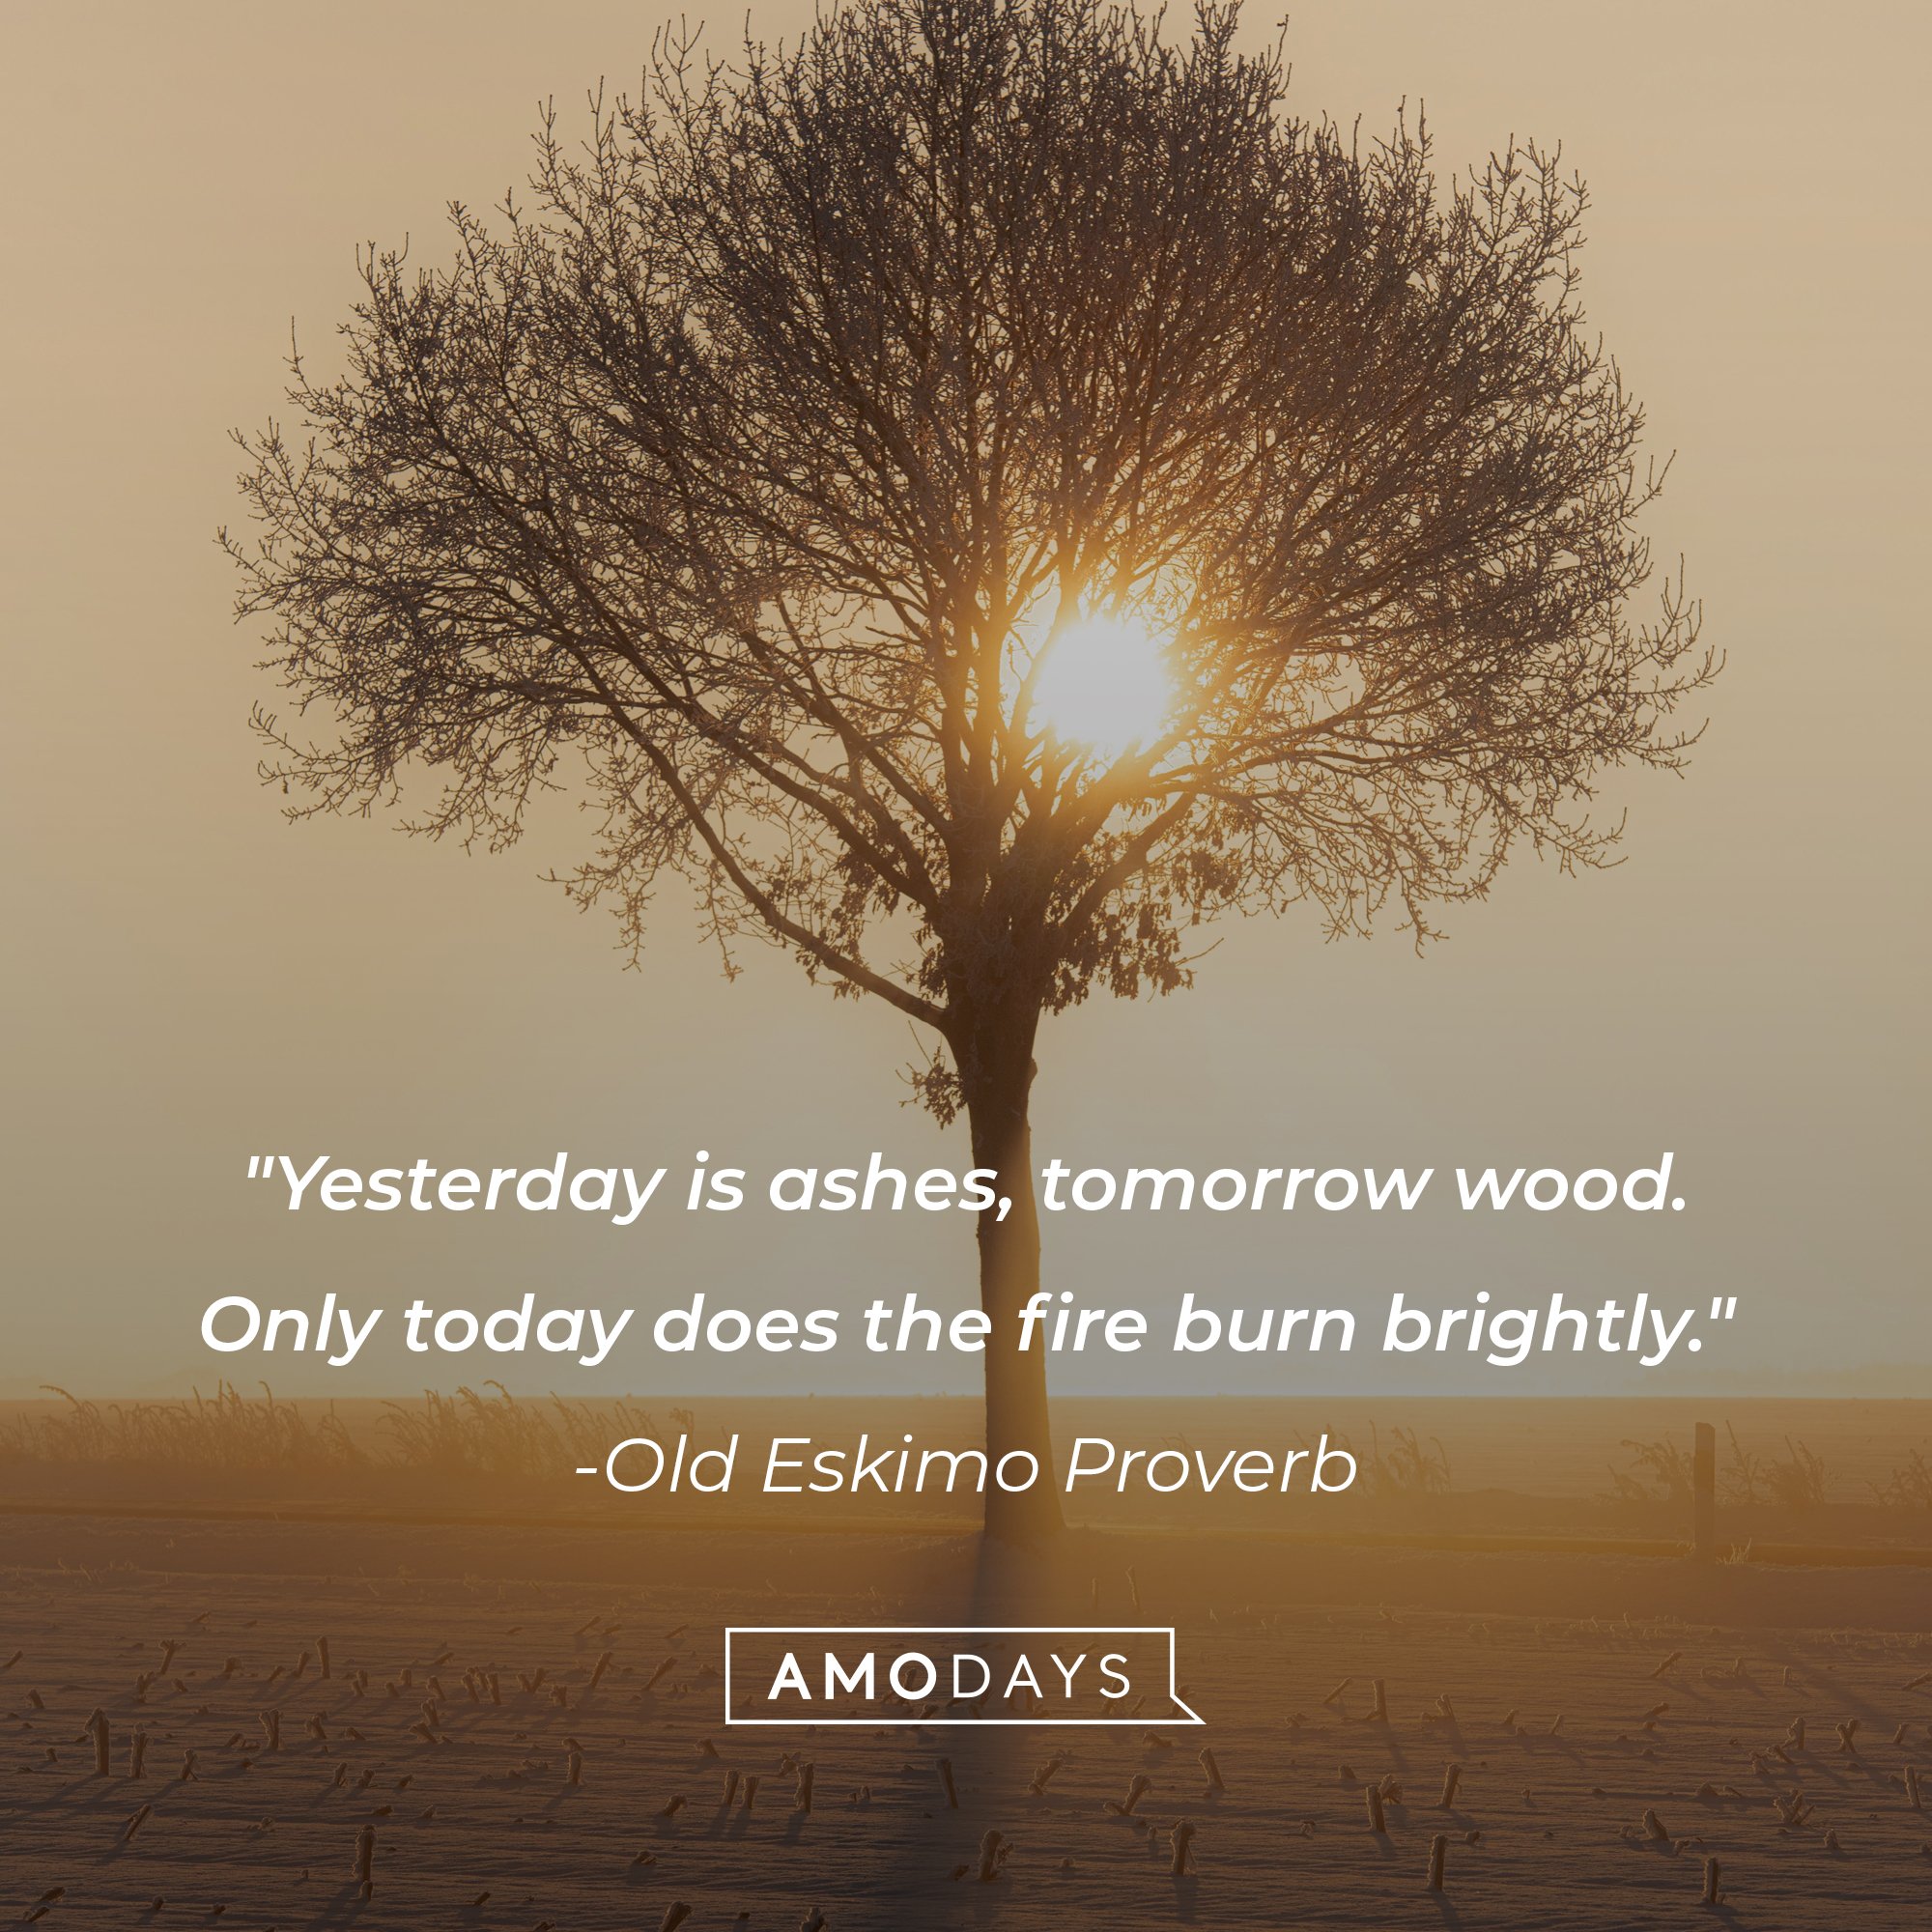  An old Eskimo Proverb quote: "Yesterday is ashes, tomorrow wood. Only today does the fire burn brightly." | Image: AmoDays